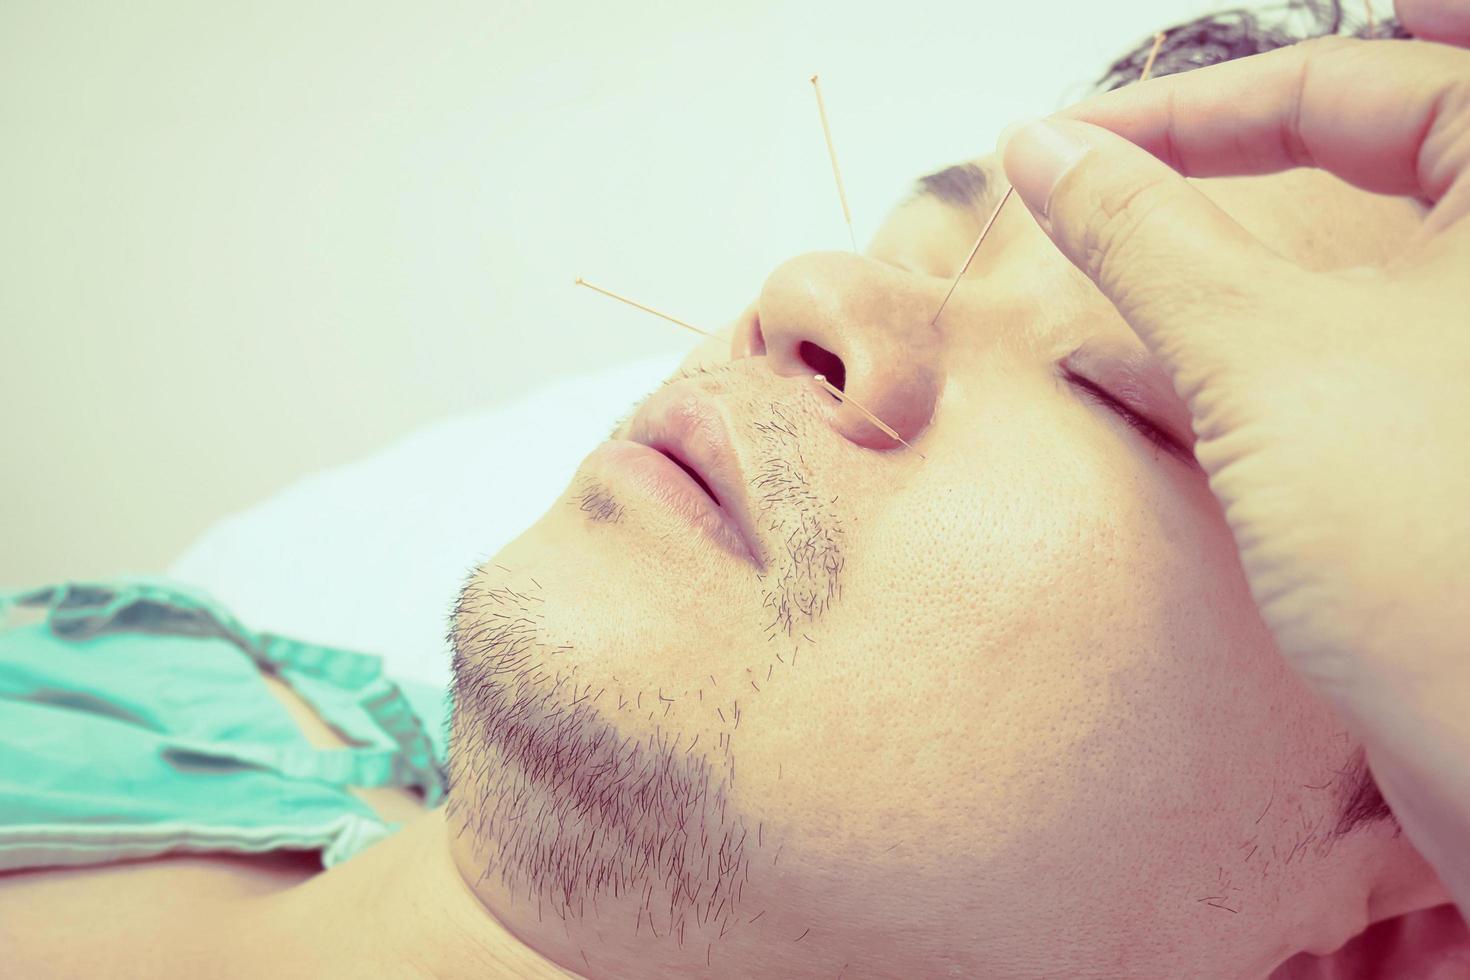 Vintage style photo of selective focused asian man is receiving Acupuncture treatment